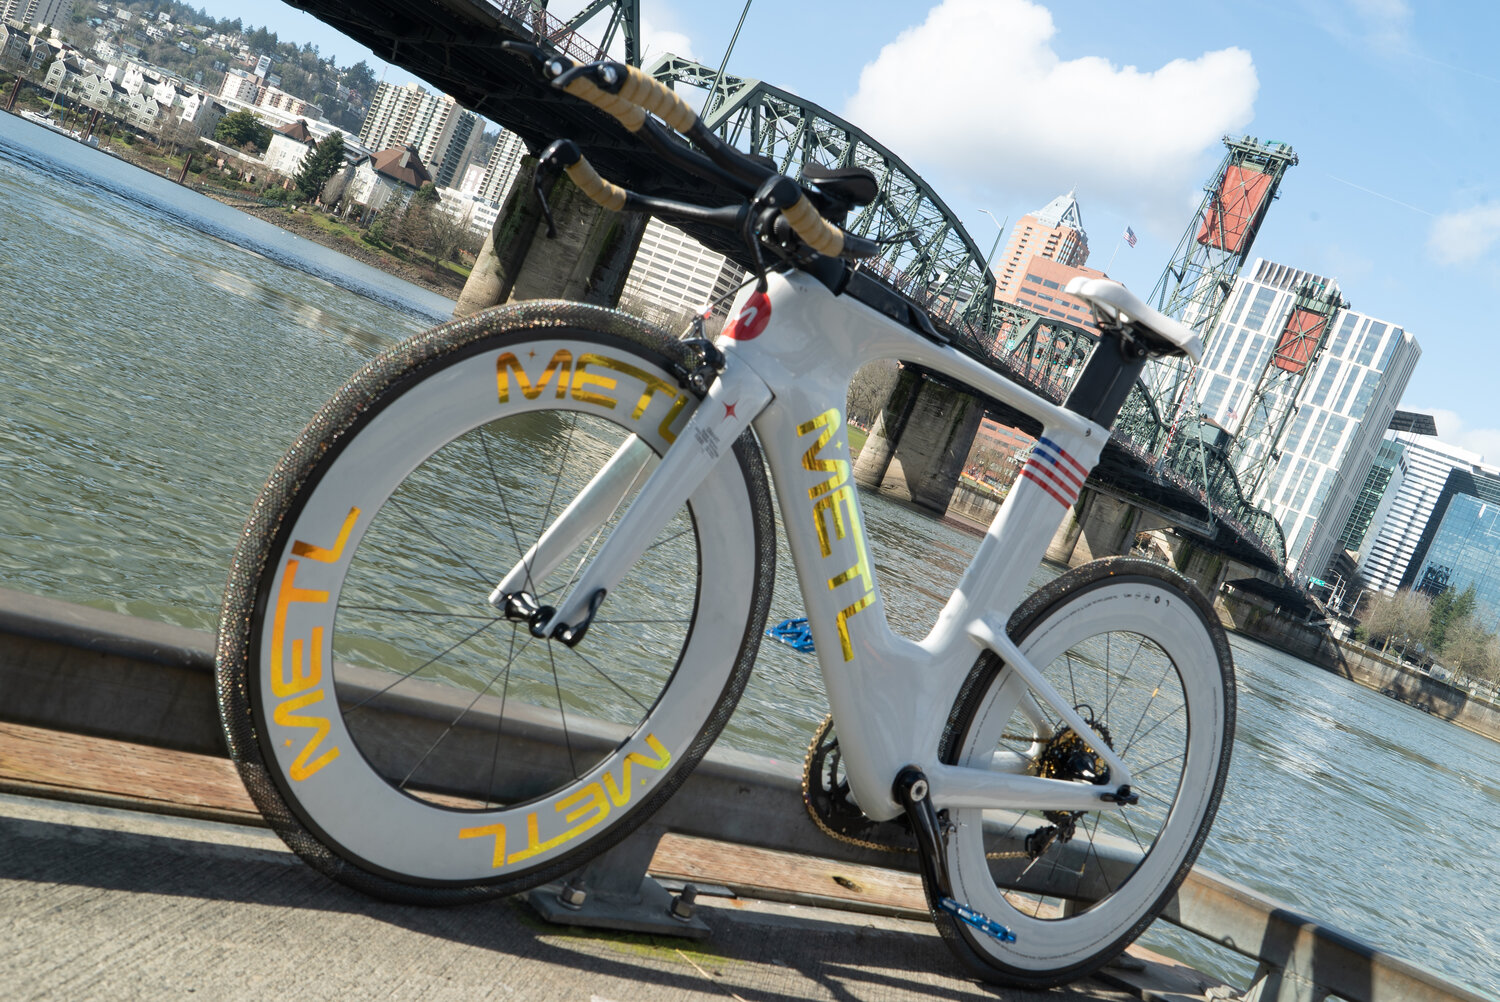 The SMART Tire Companys continued development aims to establish METL tires as the premier high-tech component for the modern cyclist across road, gravel, mountain and e-bike applications.